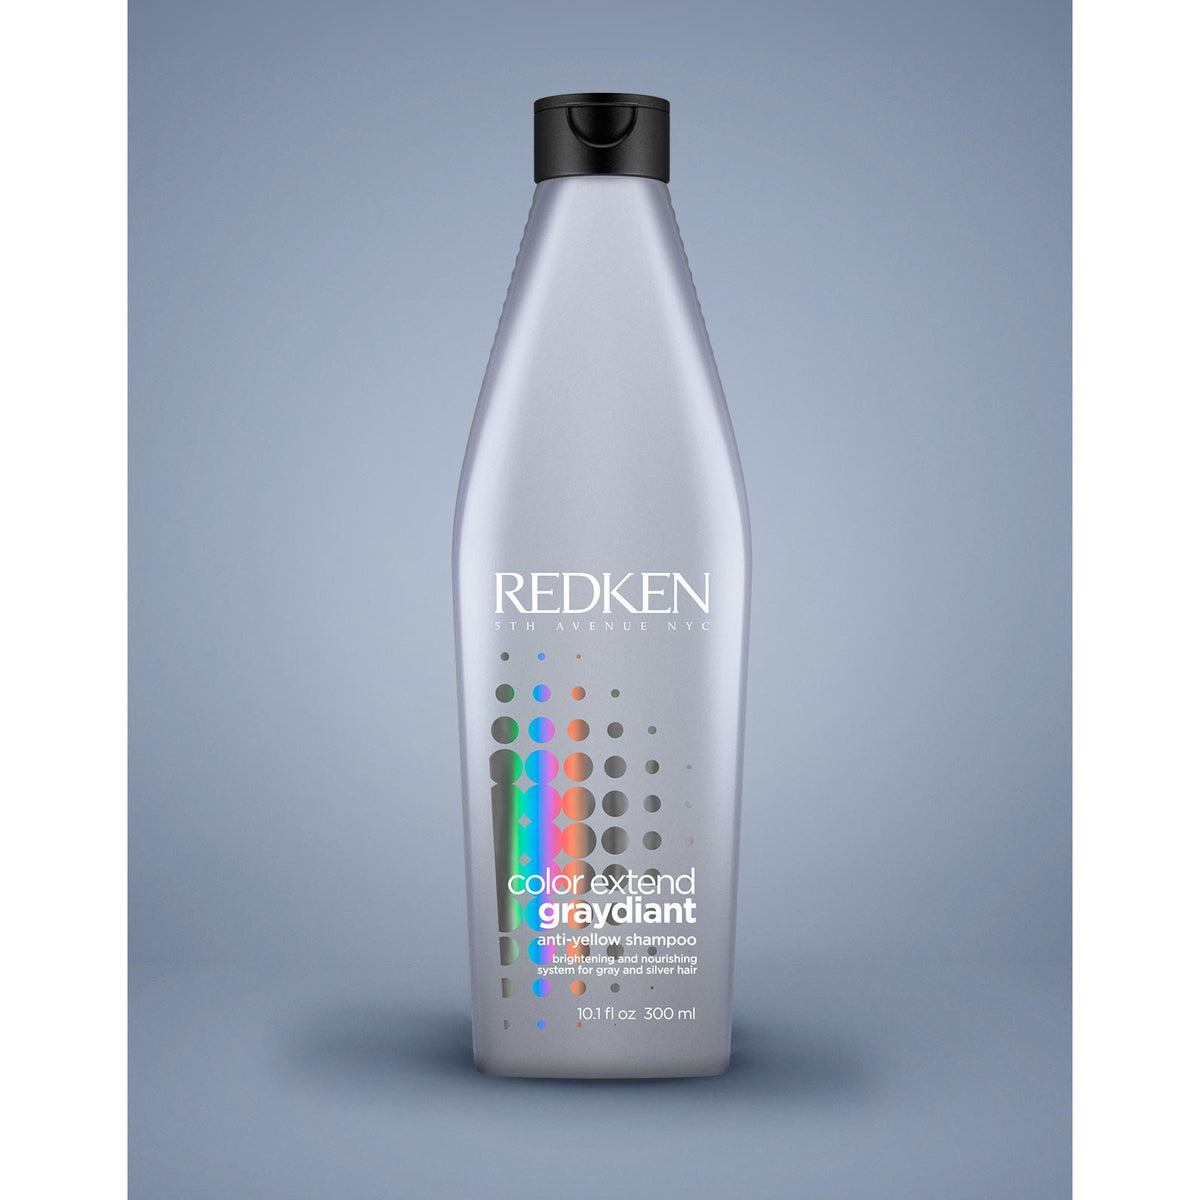 Redken Color Extend Graydiant Anti Yellow Shampoo